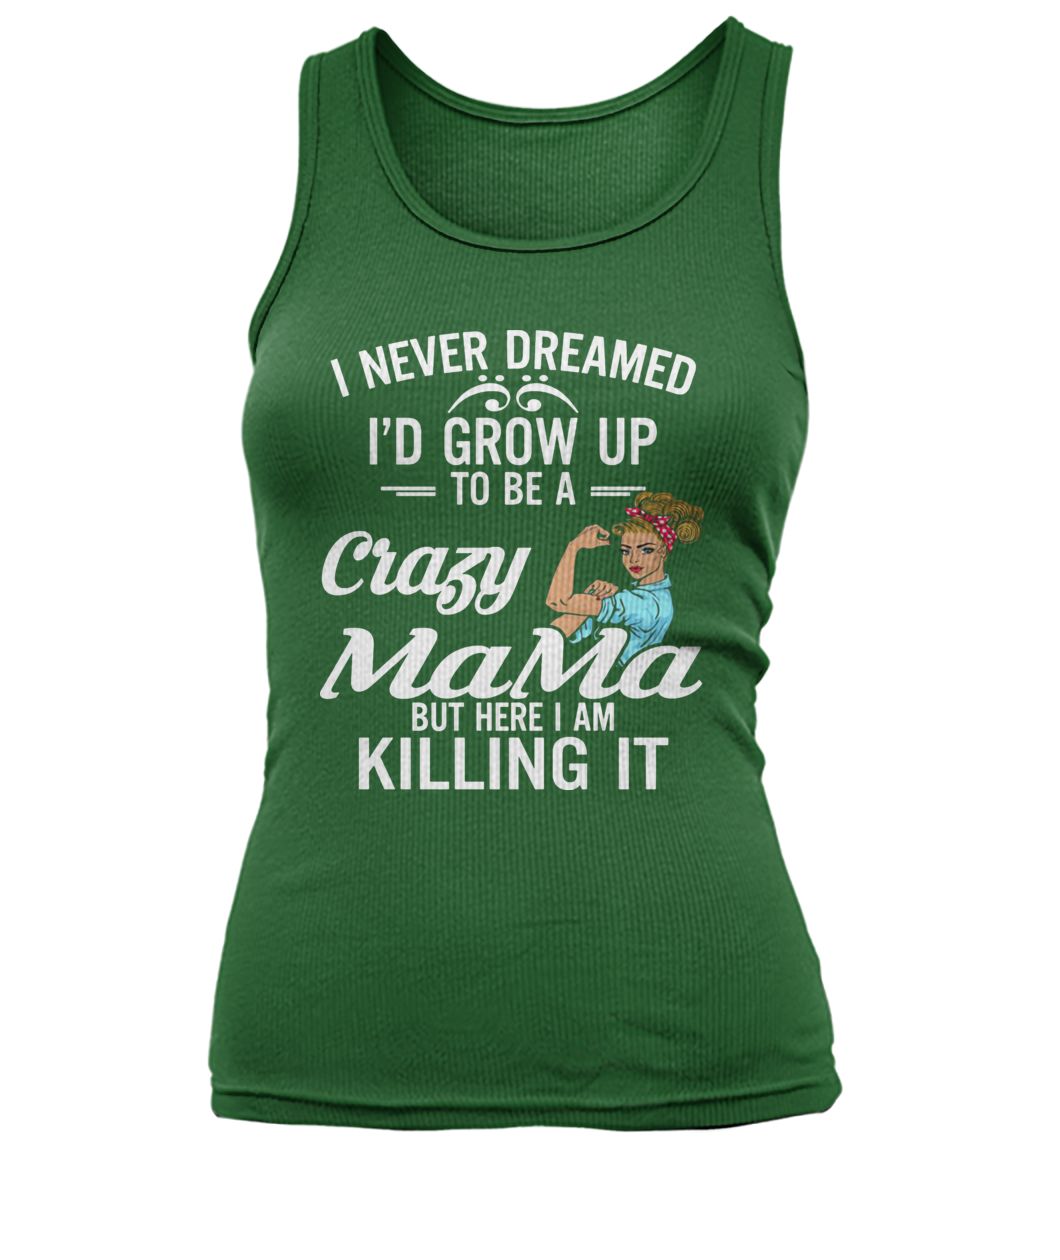 I never dreamed I'd grow up to be a crazy mama but here I am killing it women's tank top